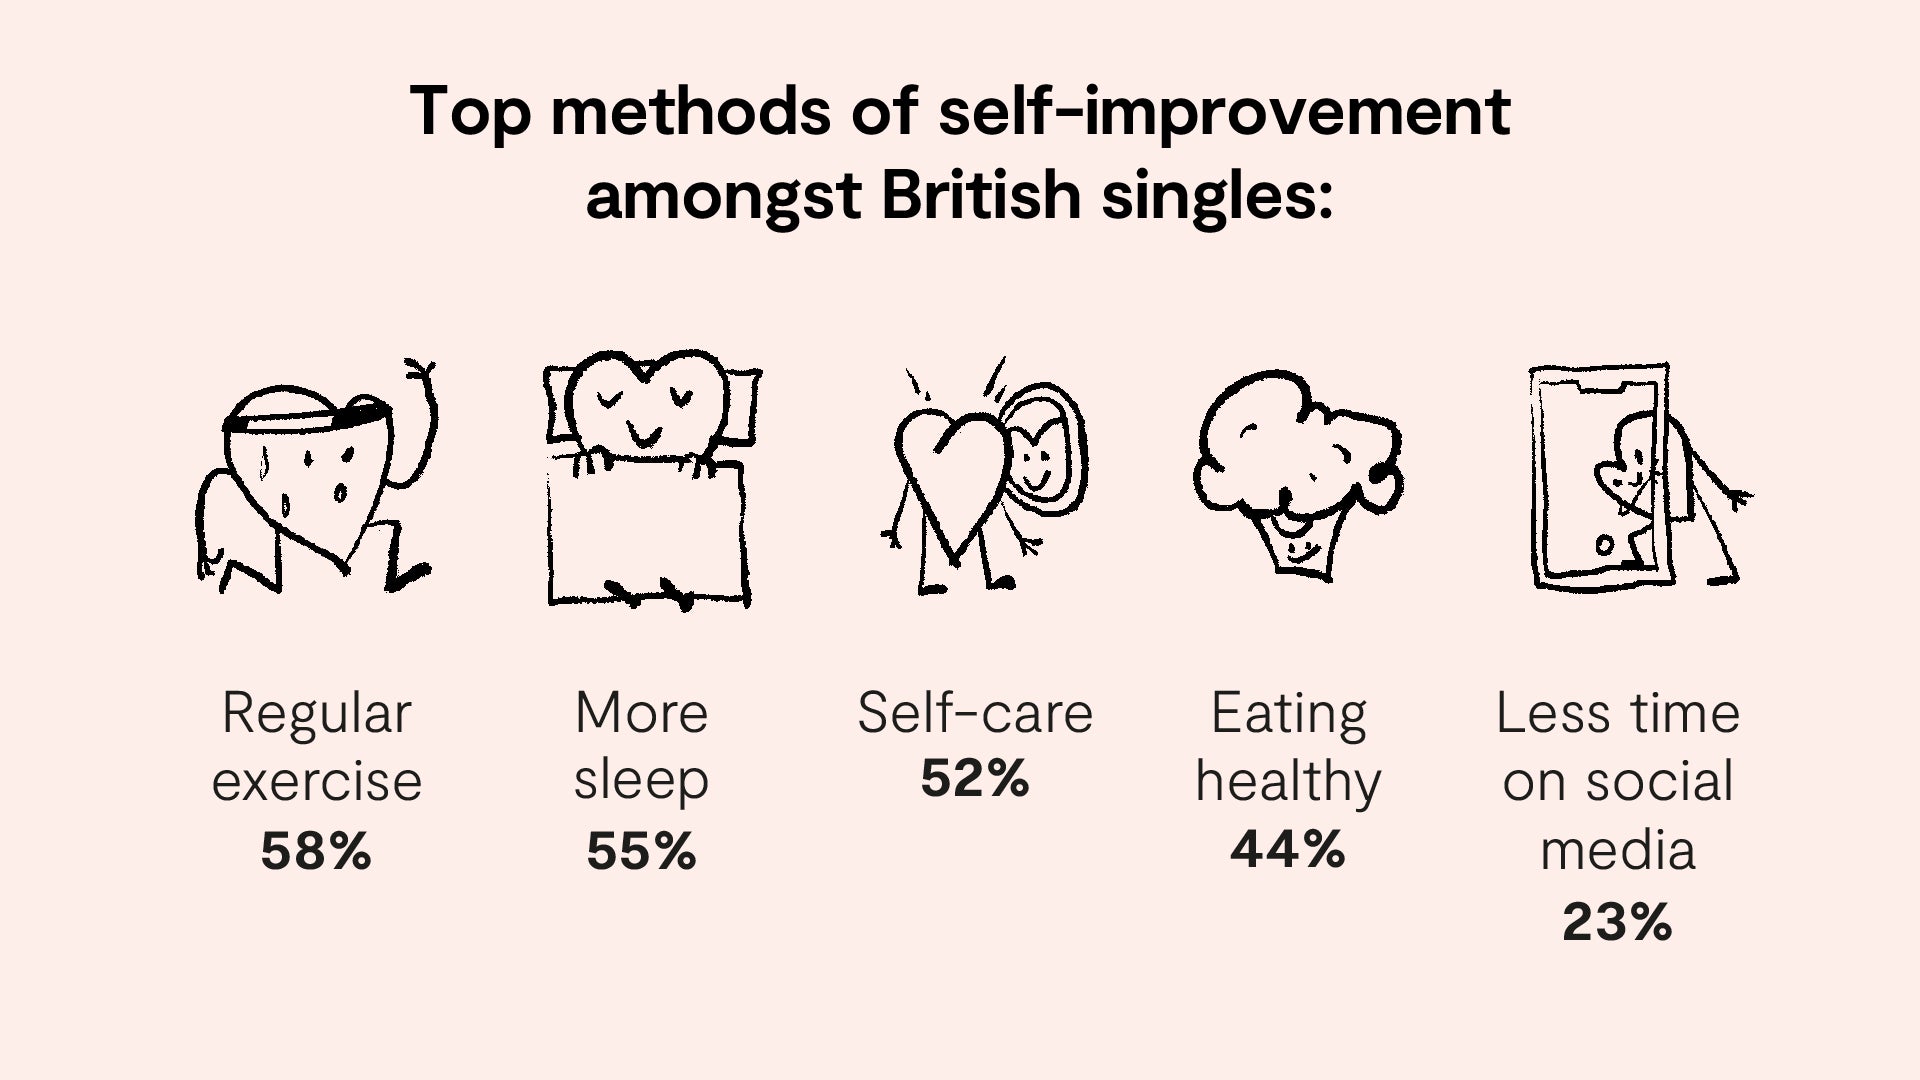 Top methods of self-improvement for single Brits